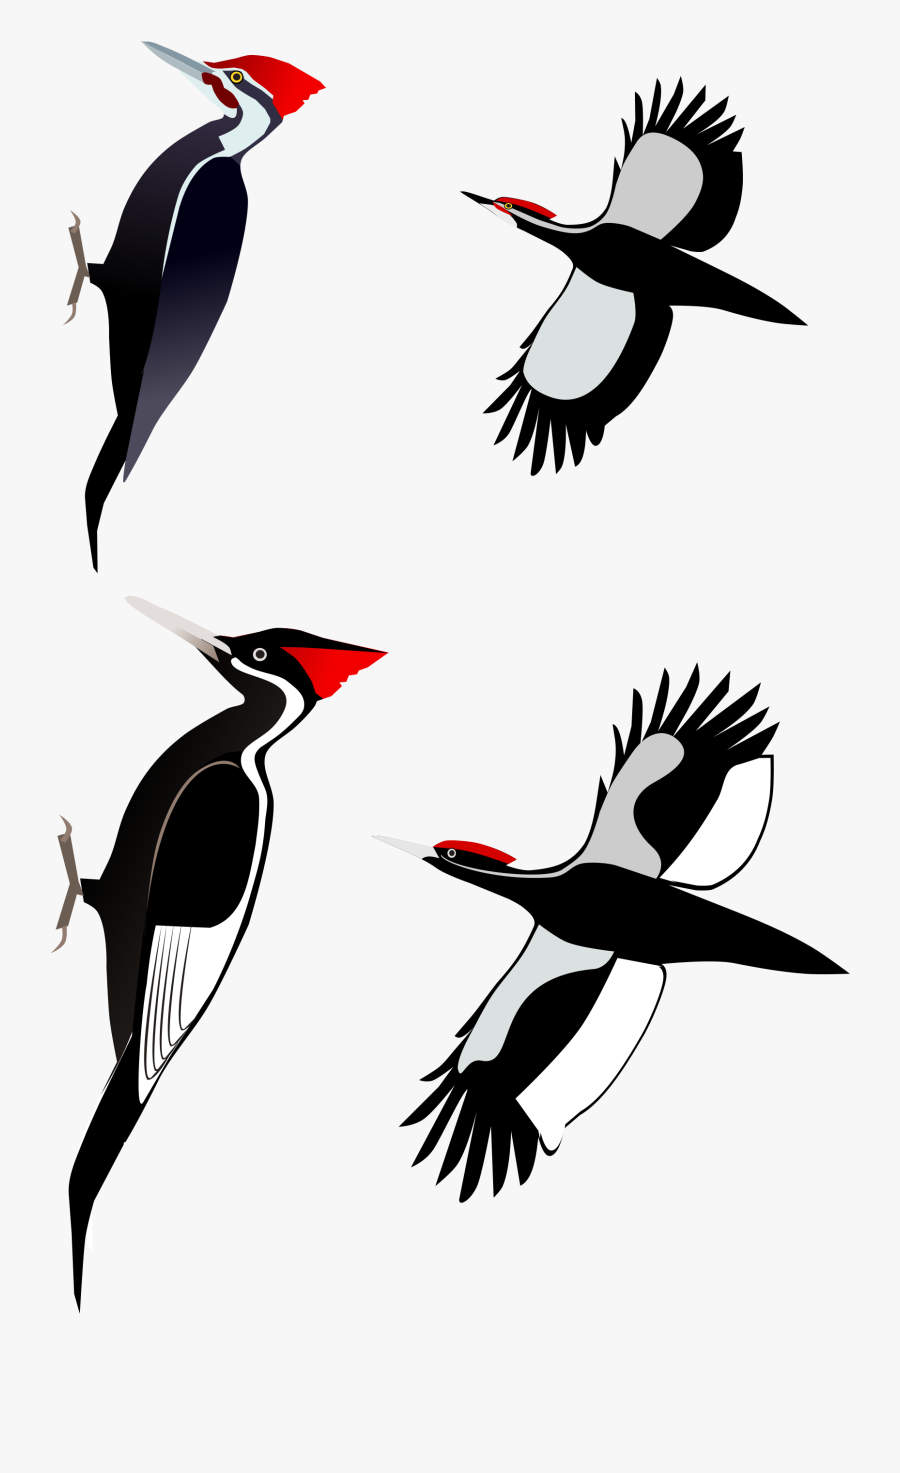 Ivory Billed Pileated Woodpecker Comparison, Transparent Clipart